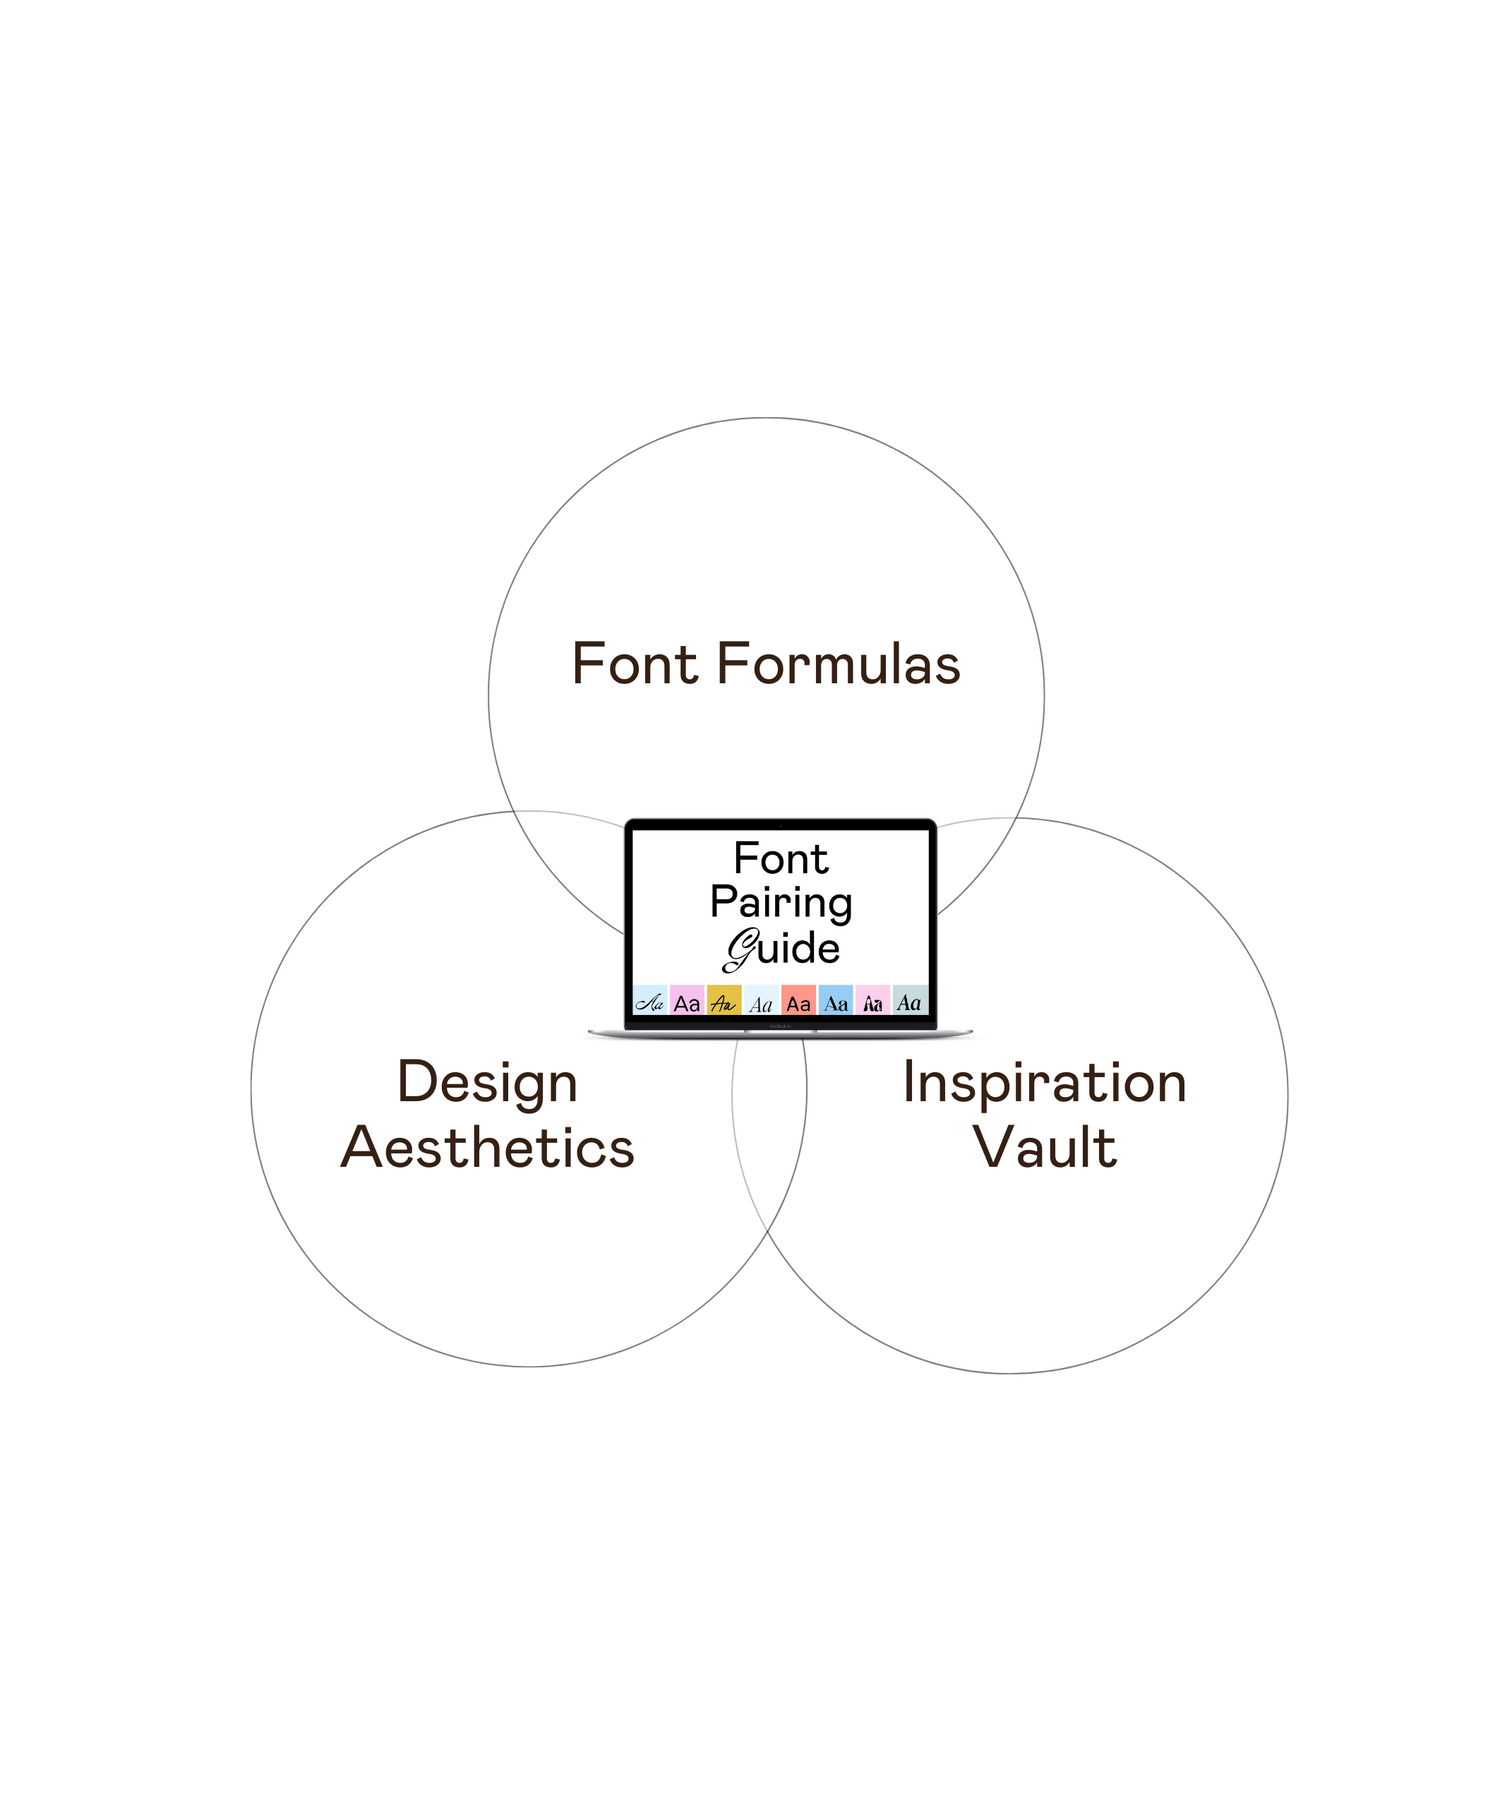 Three overlapping circles that say 'font formulas', 'inspiration vault', and 'design aesthetics'. In the middle of all 3 circles is a laptop mockup of the Font Pairing Guide